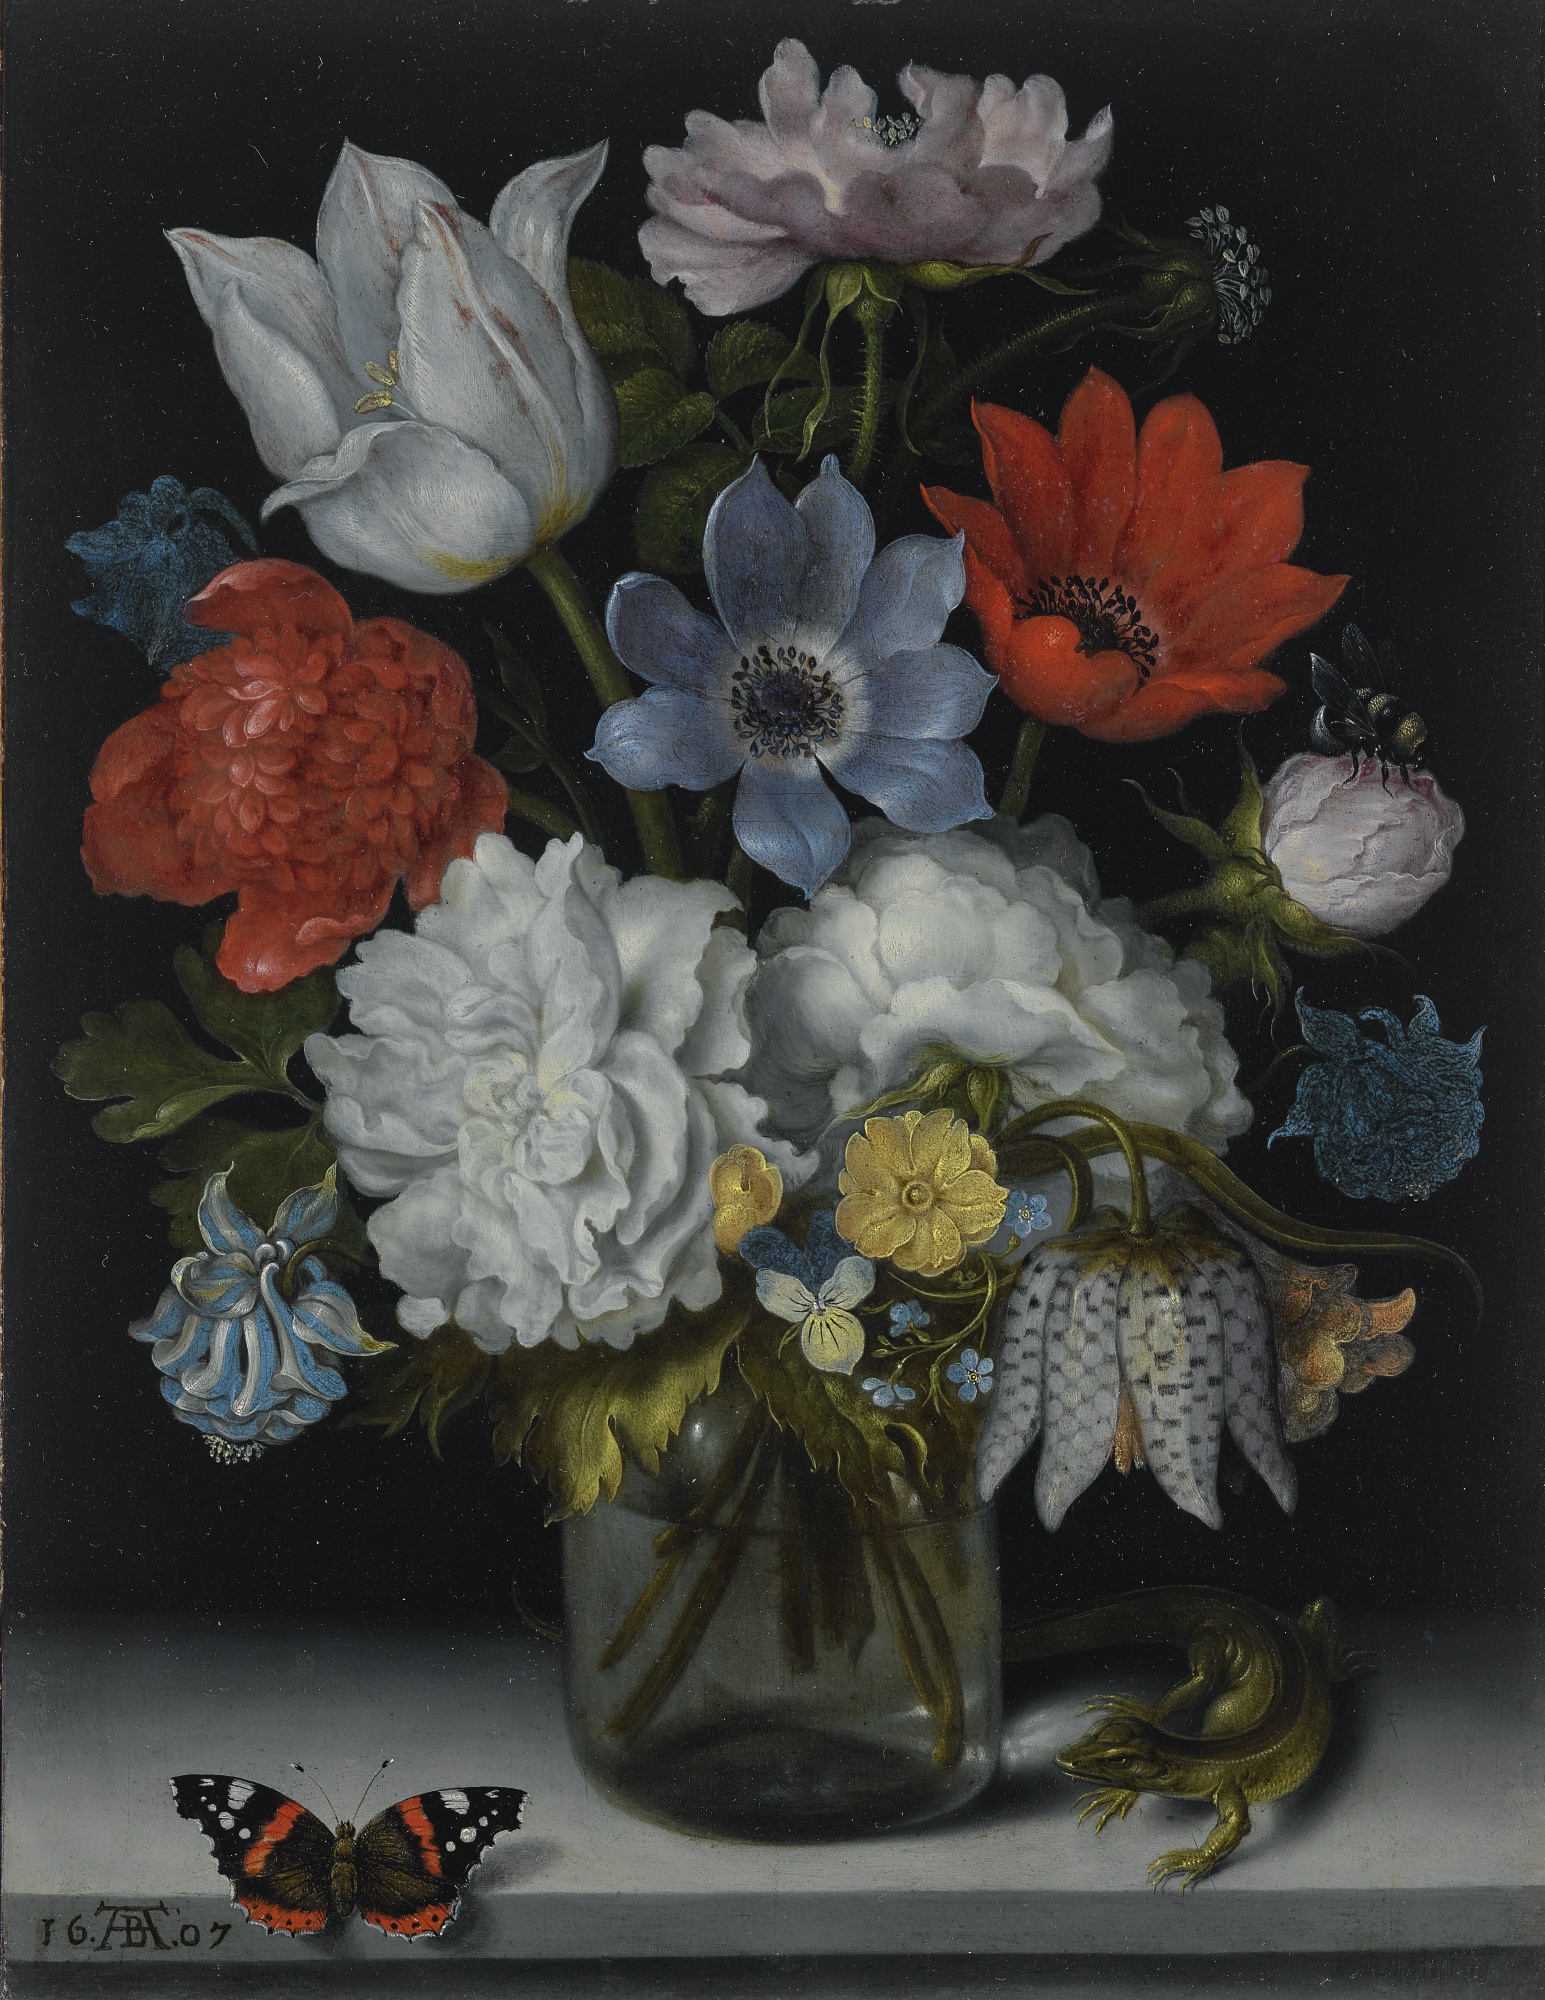 A Still Life of Flowers in a Glass Flask on a Marble Ledge, Flanked by a Red Admiral Butterfly and a Lizard, by Ambrosius Bosschaert the Elder, 1607